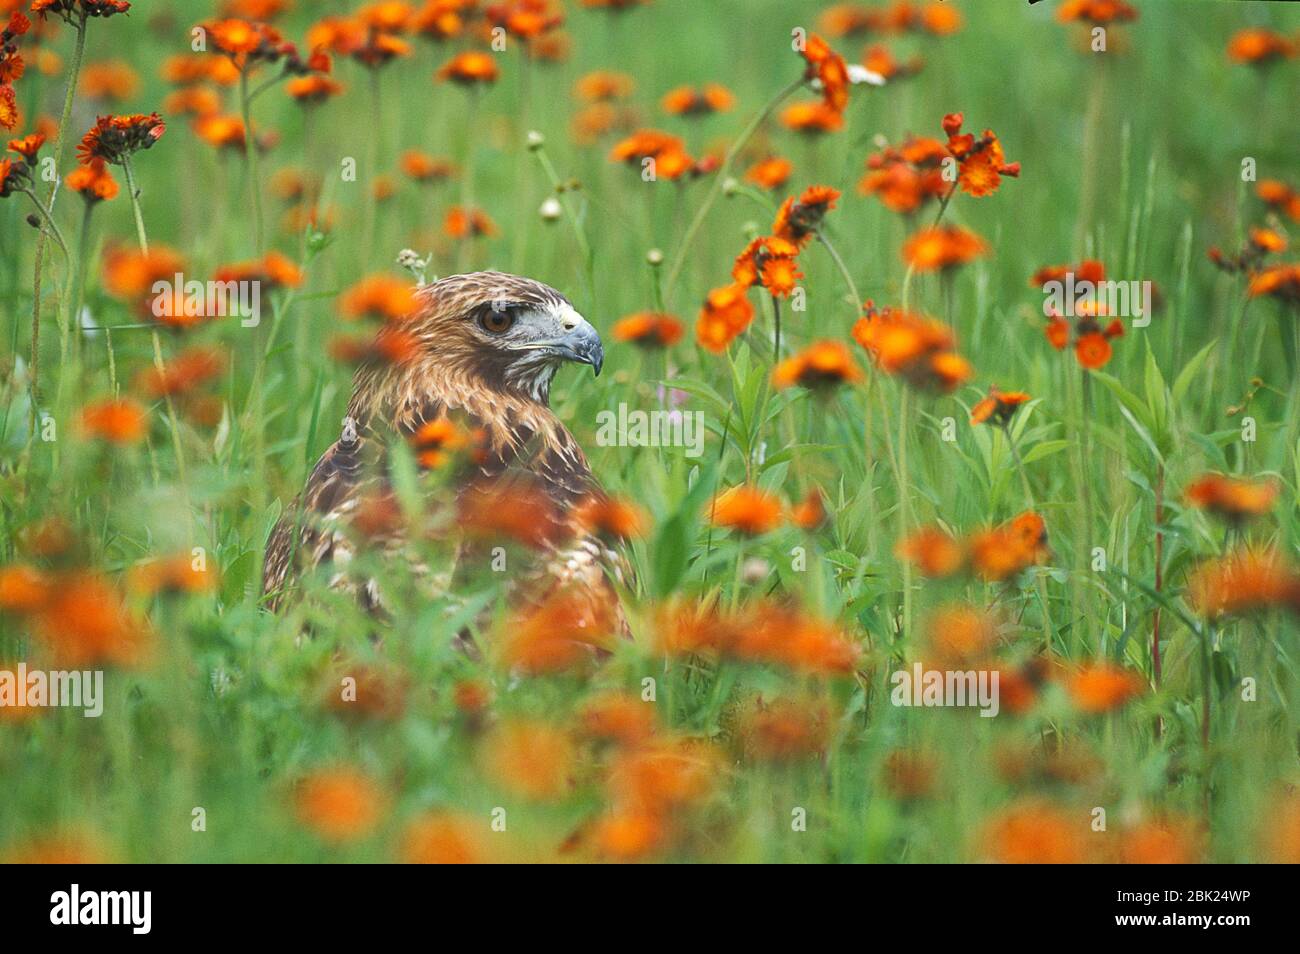 Red Tailed Hawk, Buteo jamaicensis, in flower meadow, Minnesota, USA, controlled situation Stock Photo